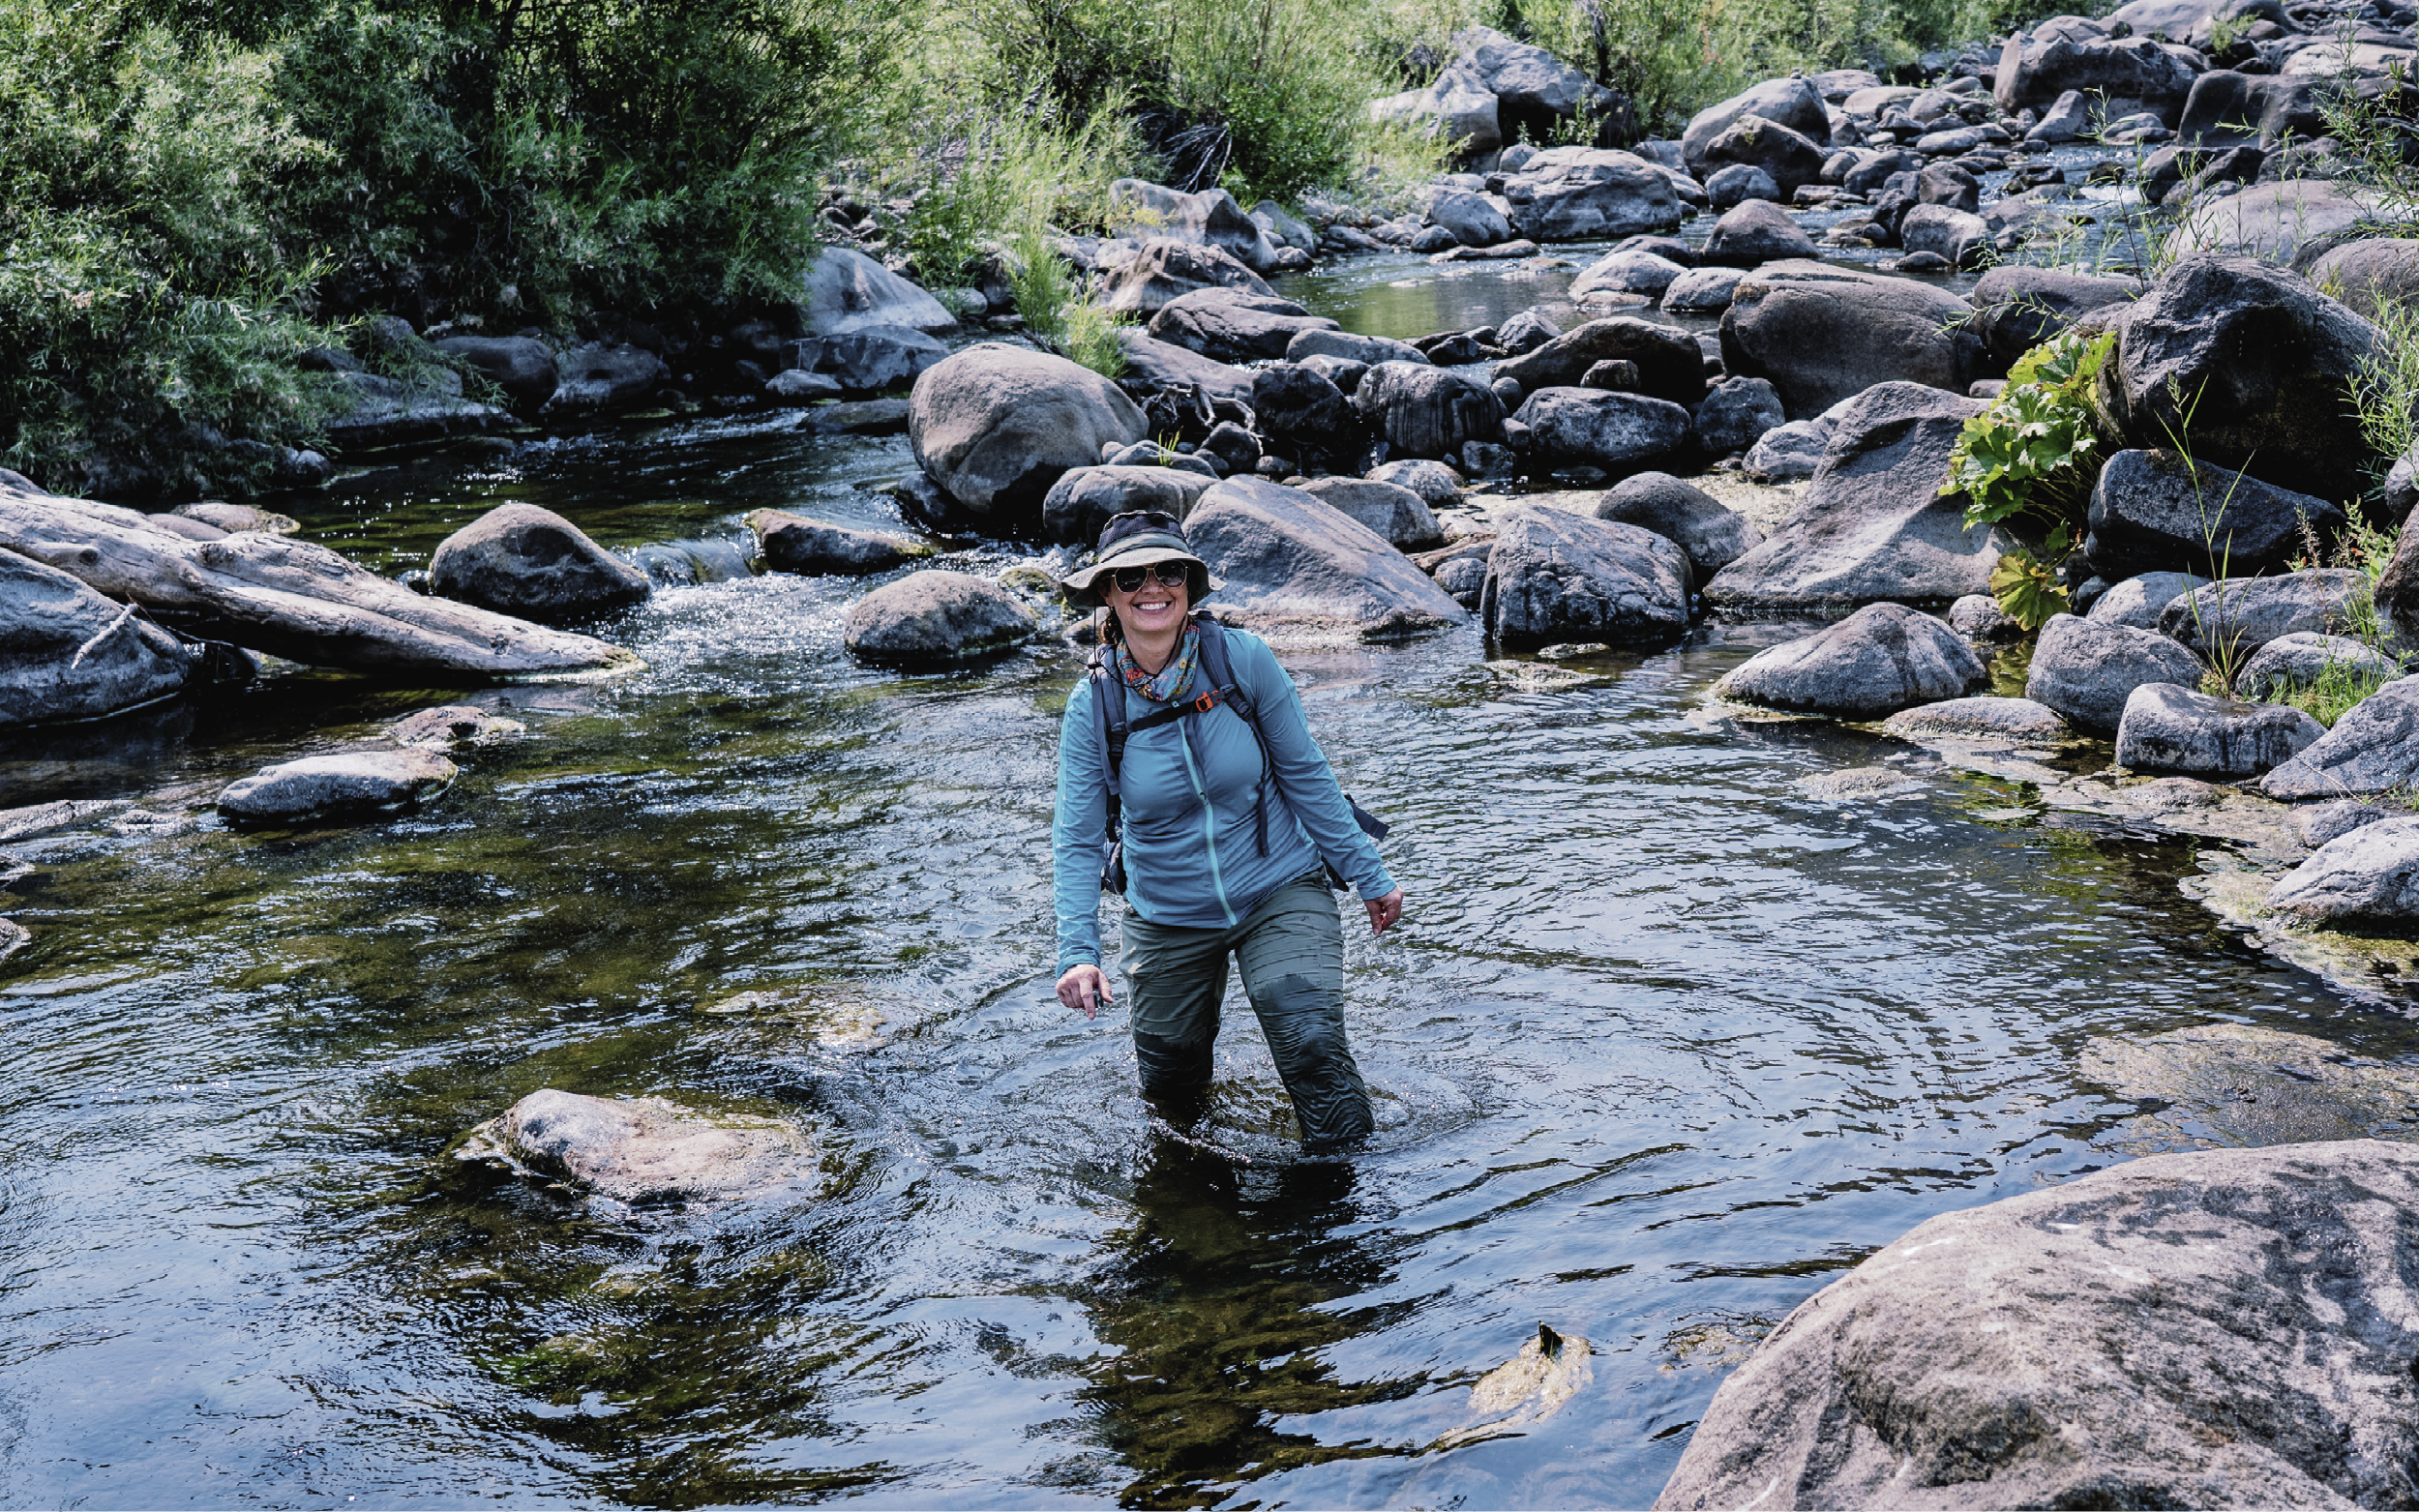 Claudia Mengelt is wearing blue waders and is knee-deep in a rocky river, smiling at the camera.